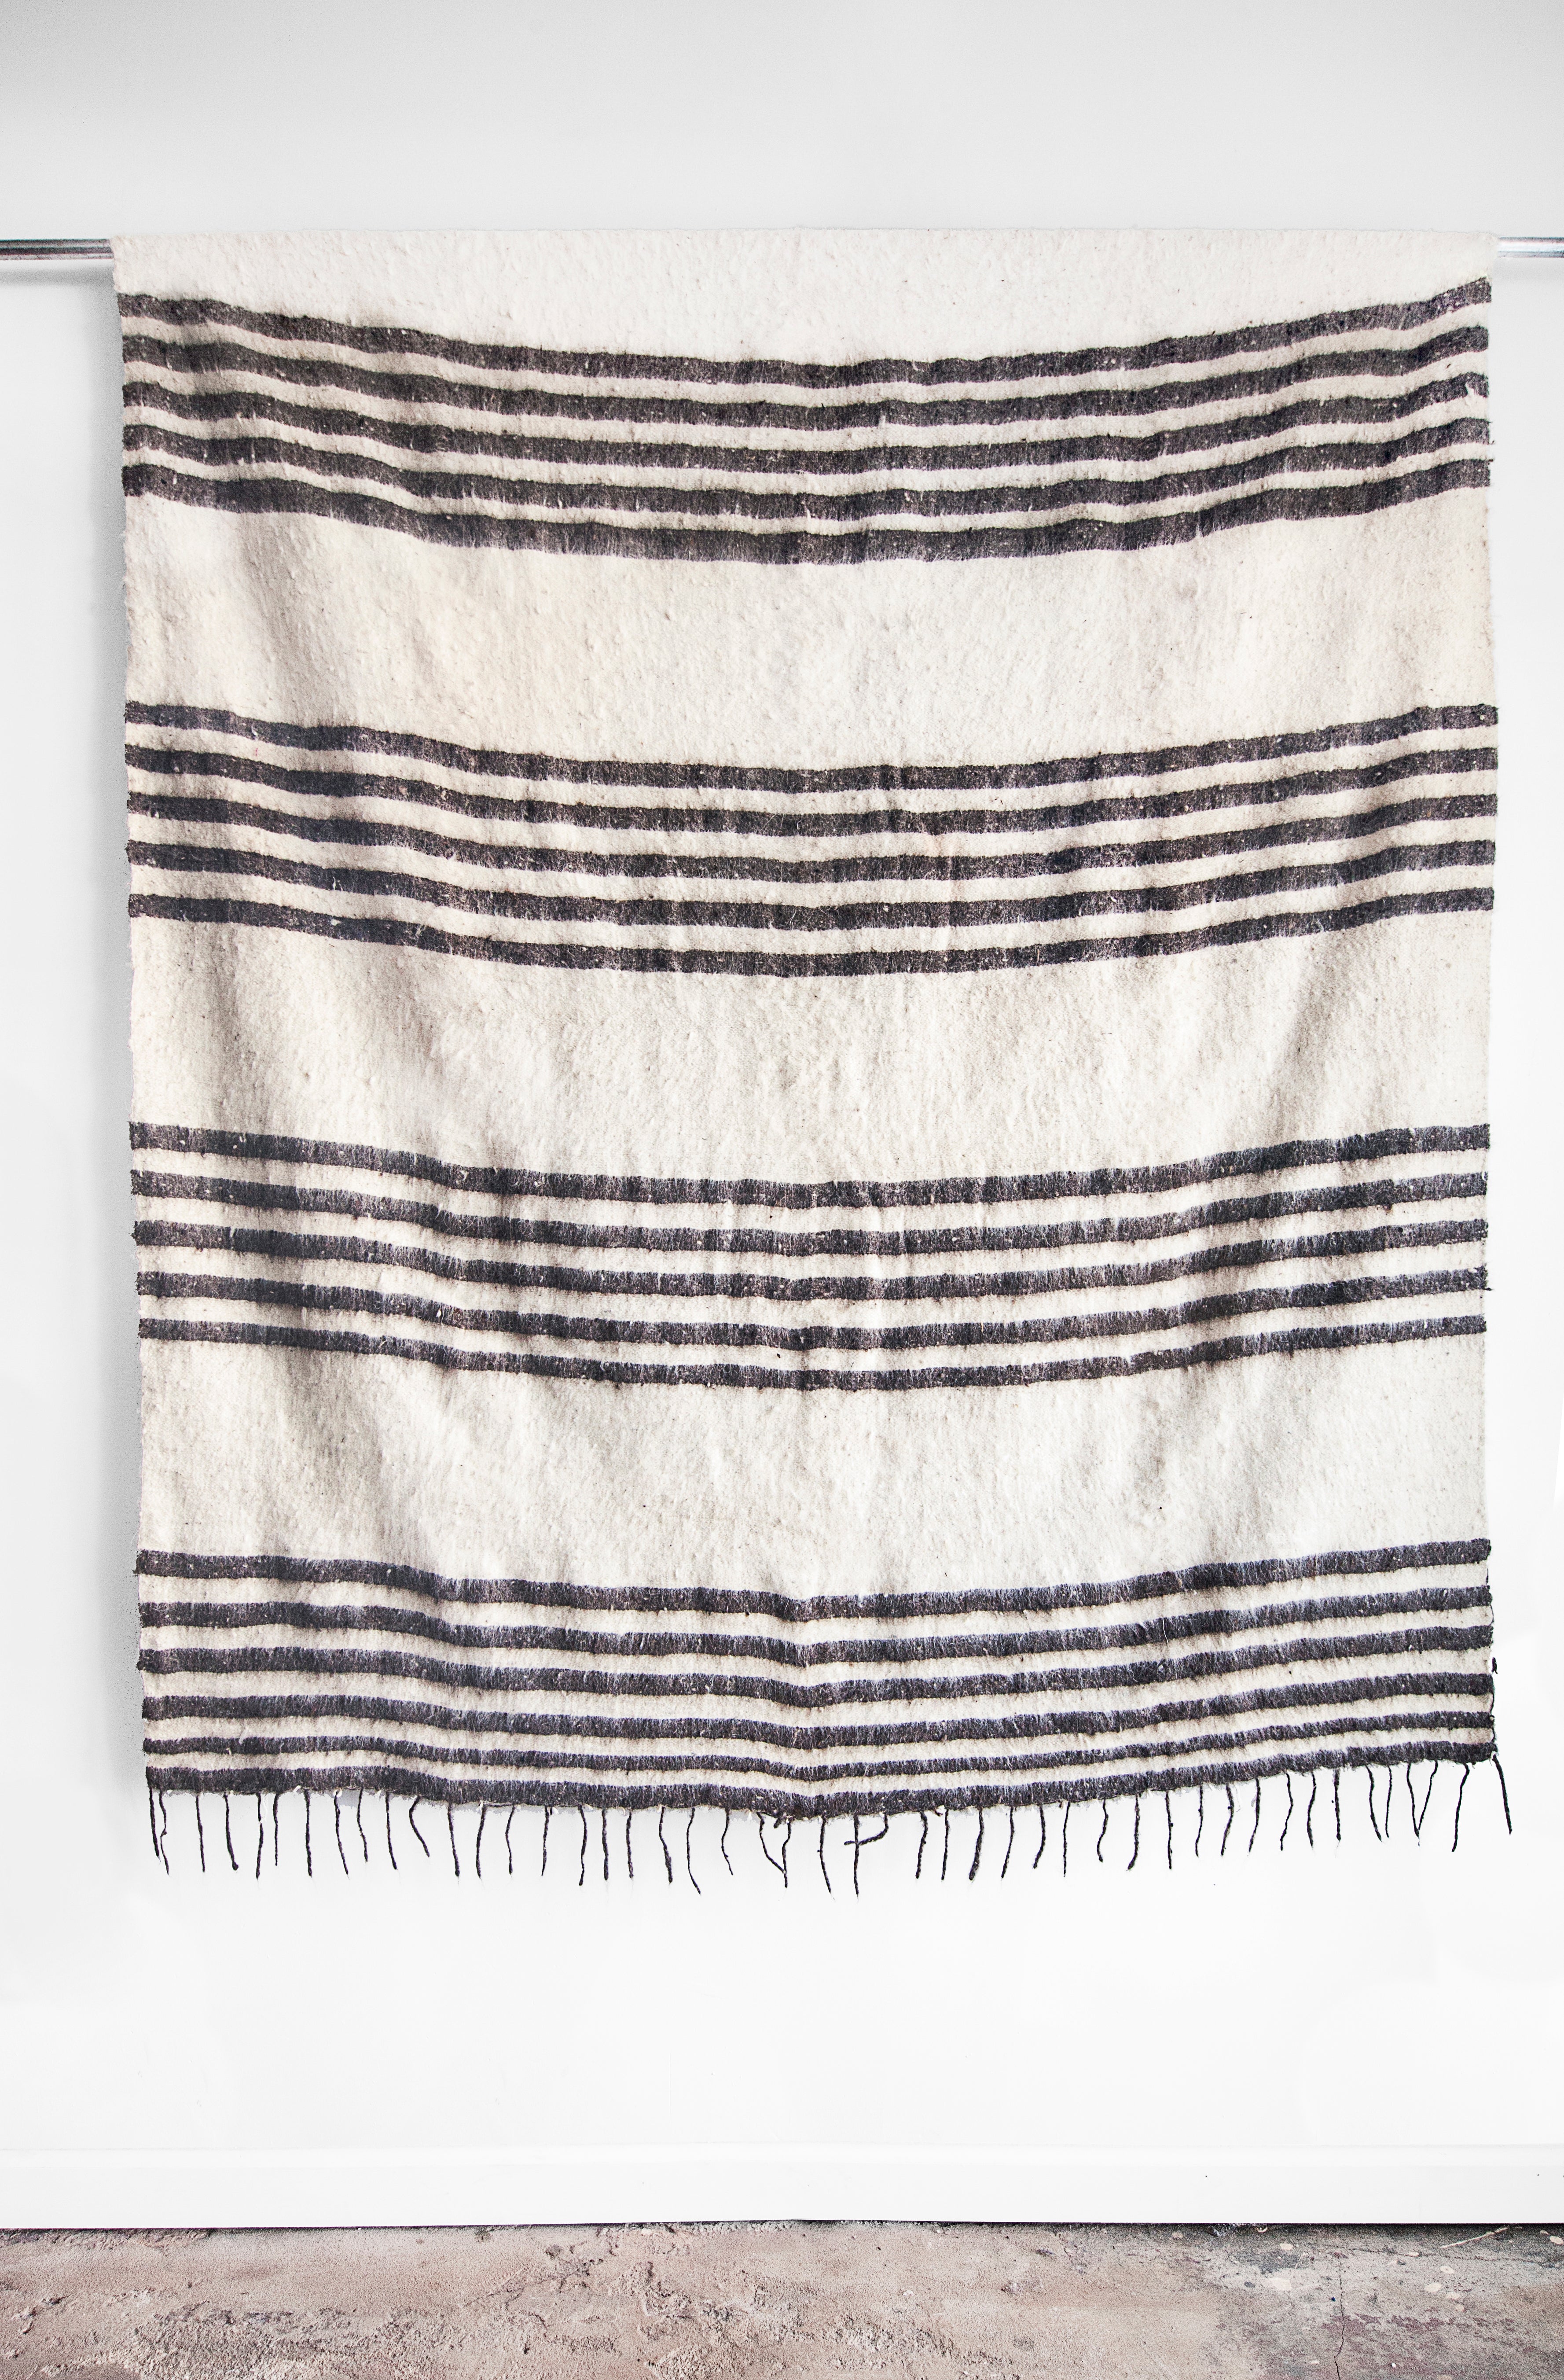 Queen sized ecru wool blanket with rows of horizontal grey stripes and a row of tied tassels at each end